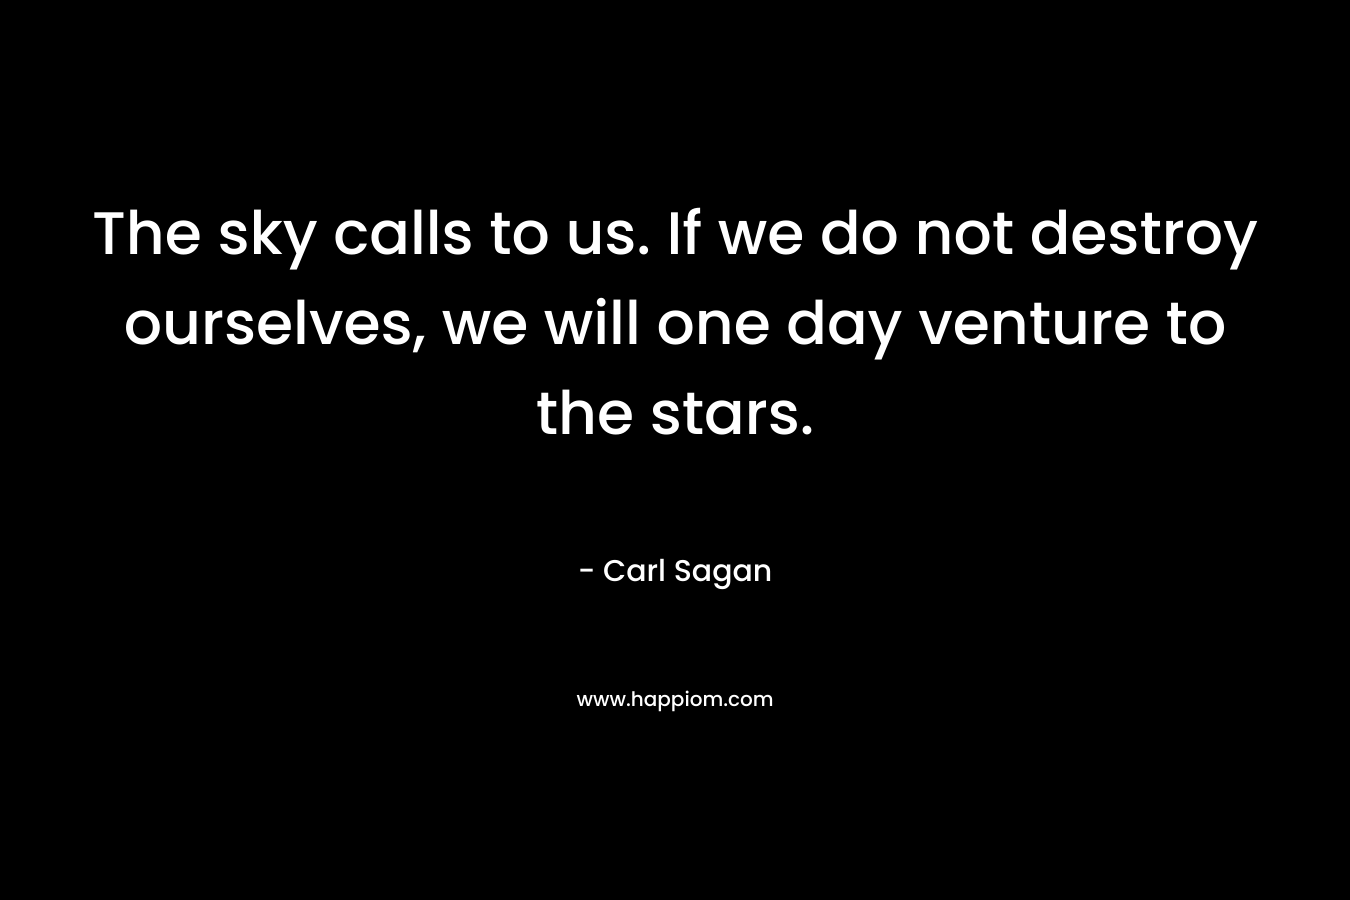 The sky calls to us. If we do not destroy ourselves, we will one day venture to the stars.